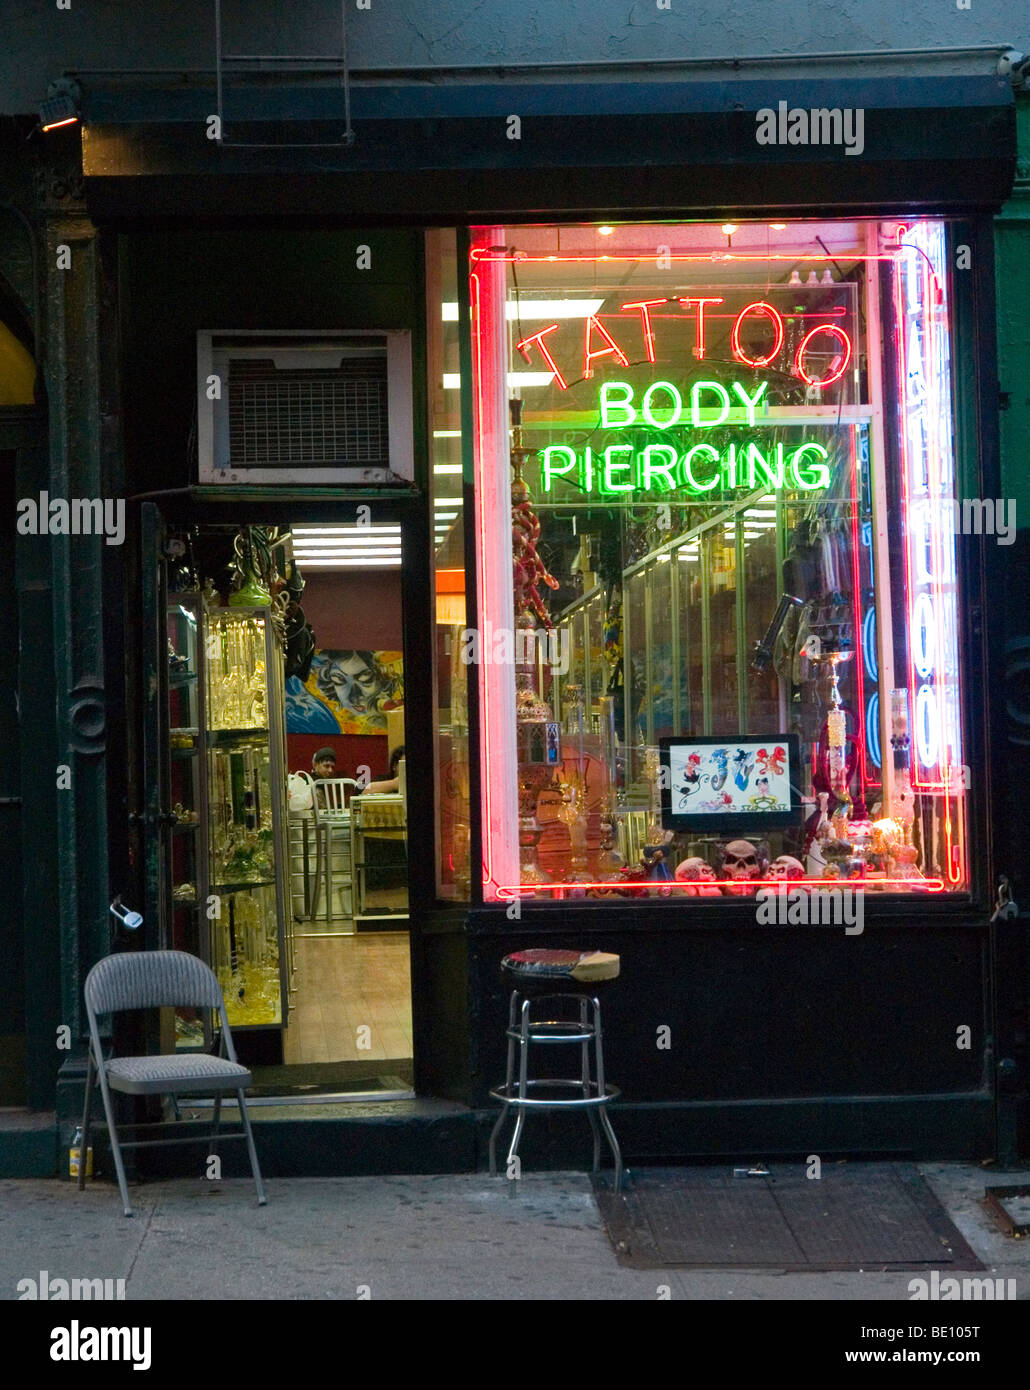 A Tattoo and Body Piercing store in Greenwich Village, New York City Stock Photo: 25837668  Alamy